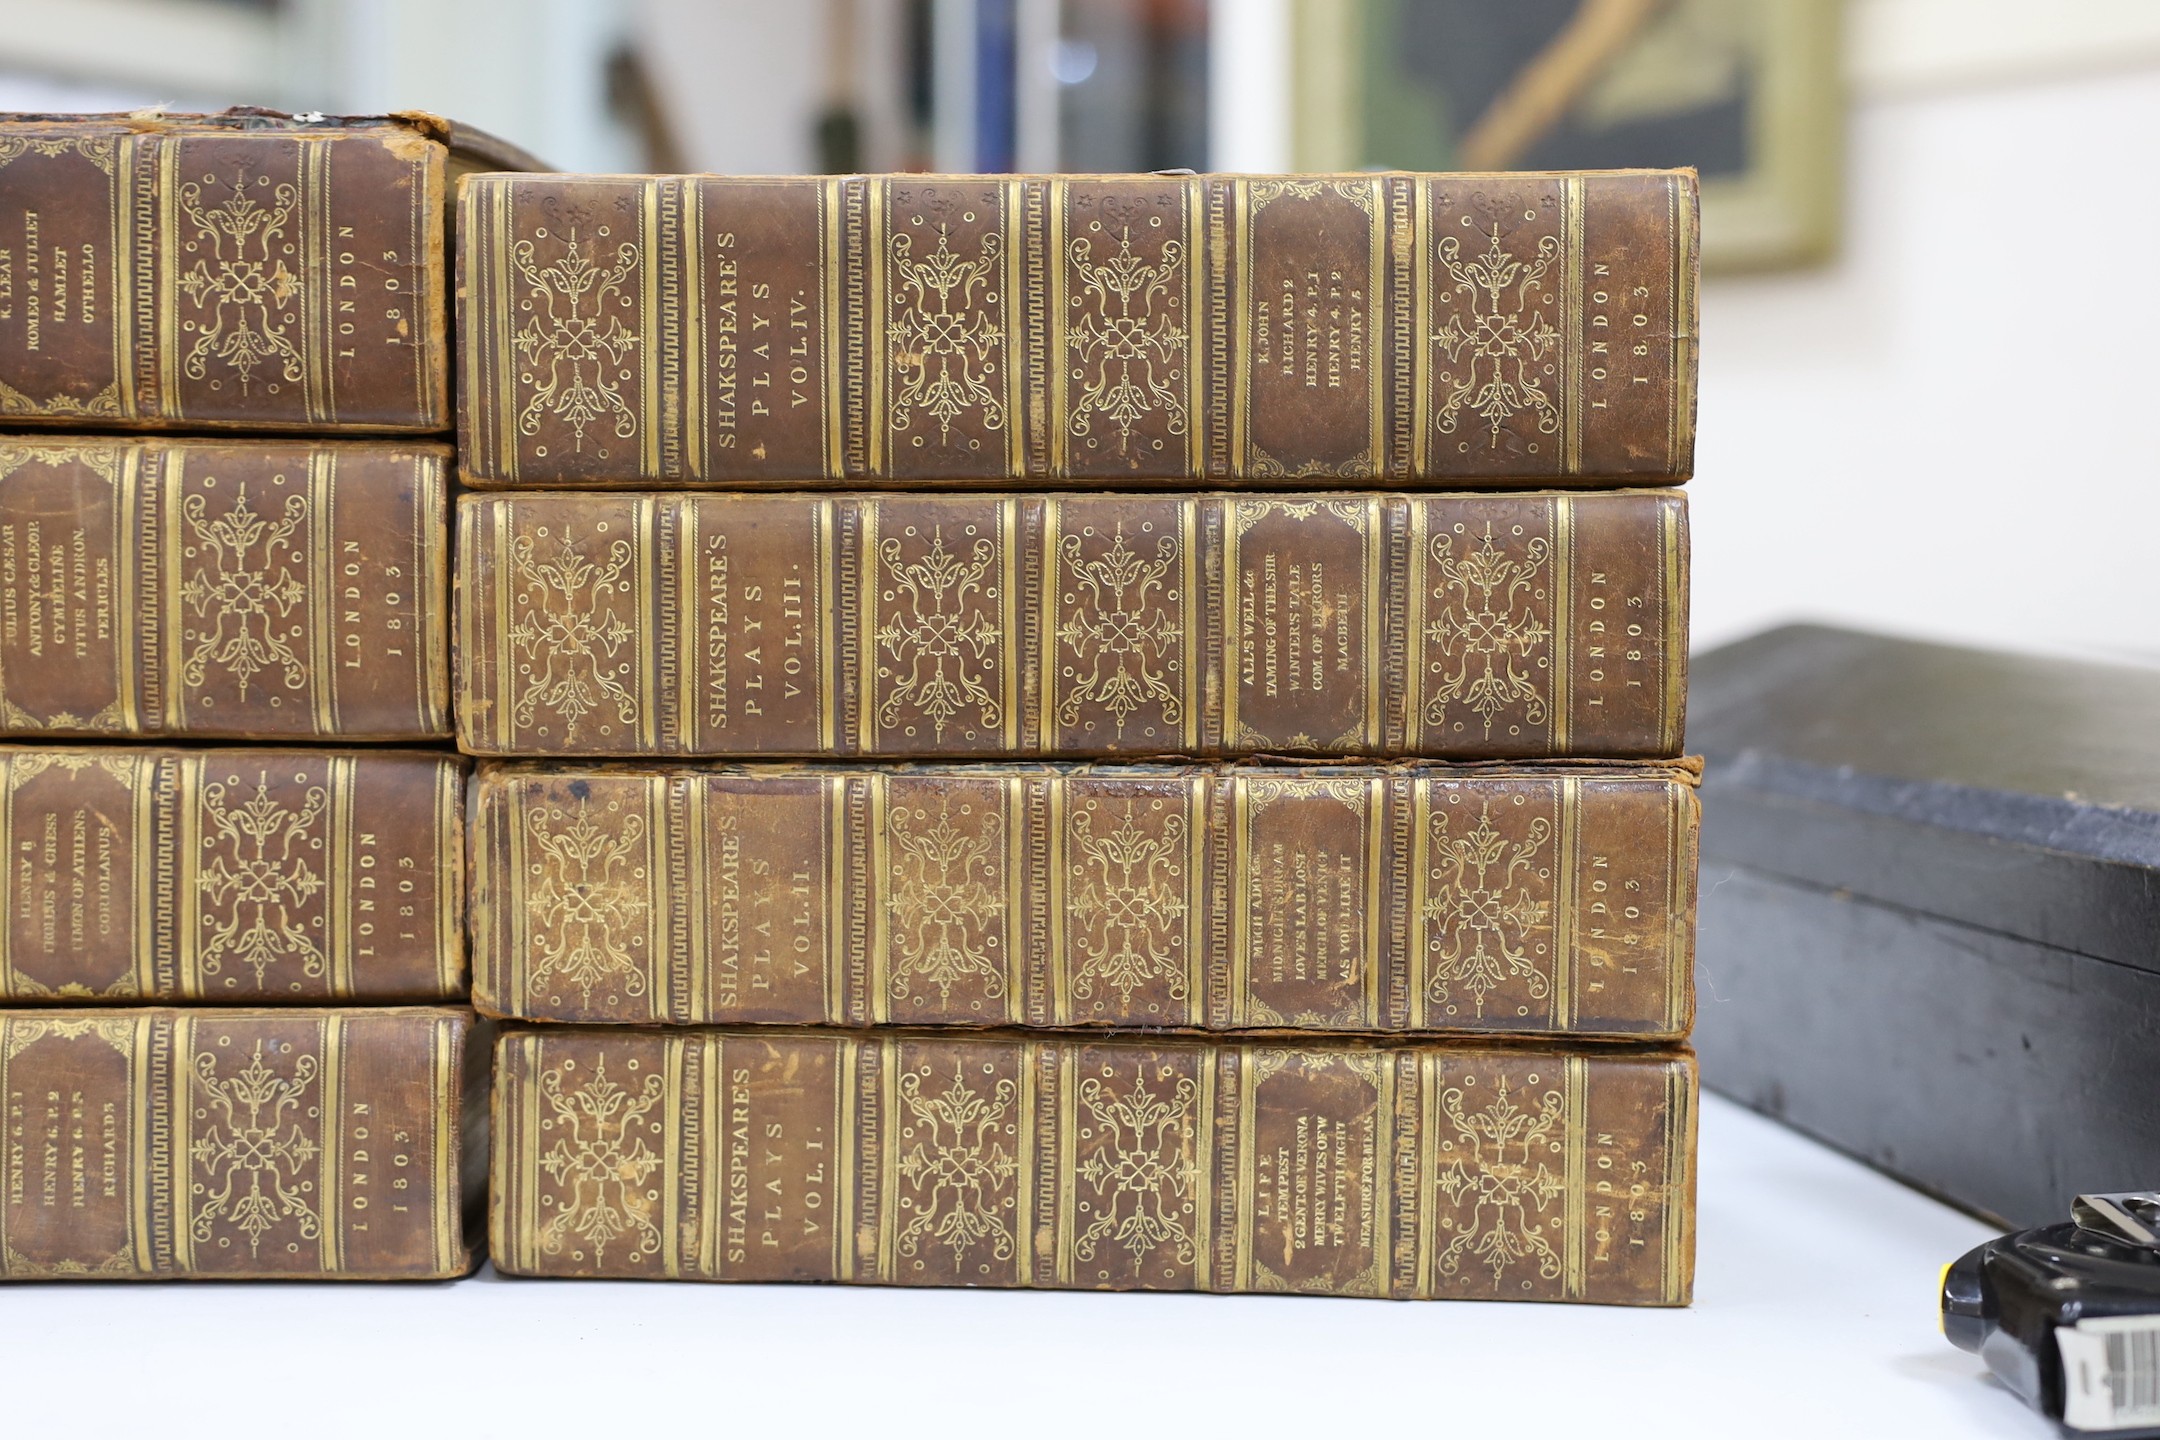 Shakespeare's plays, pub. 1803, eight leather-bound volumes, printed by T. Bensley for Wynne and Scholey, and J. Wallis